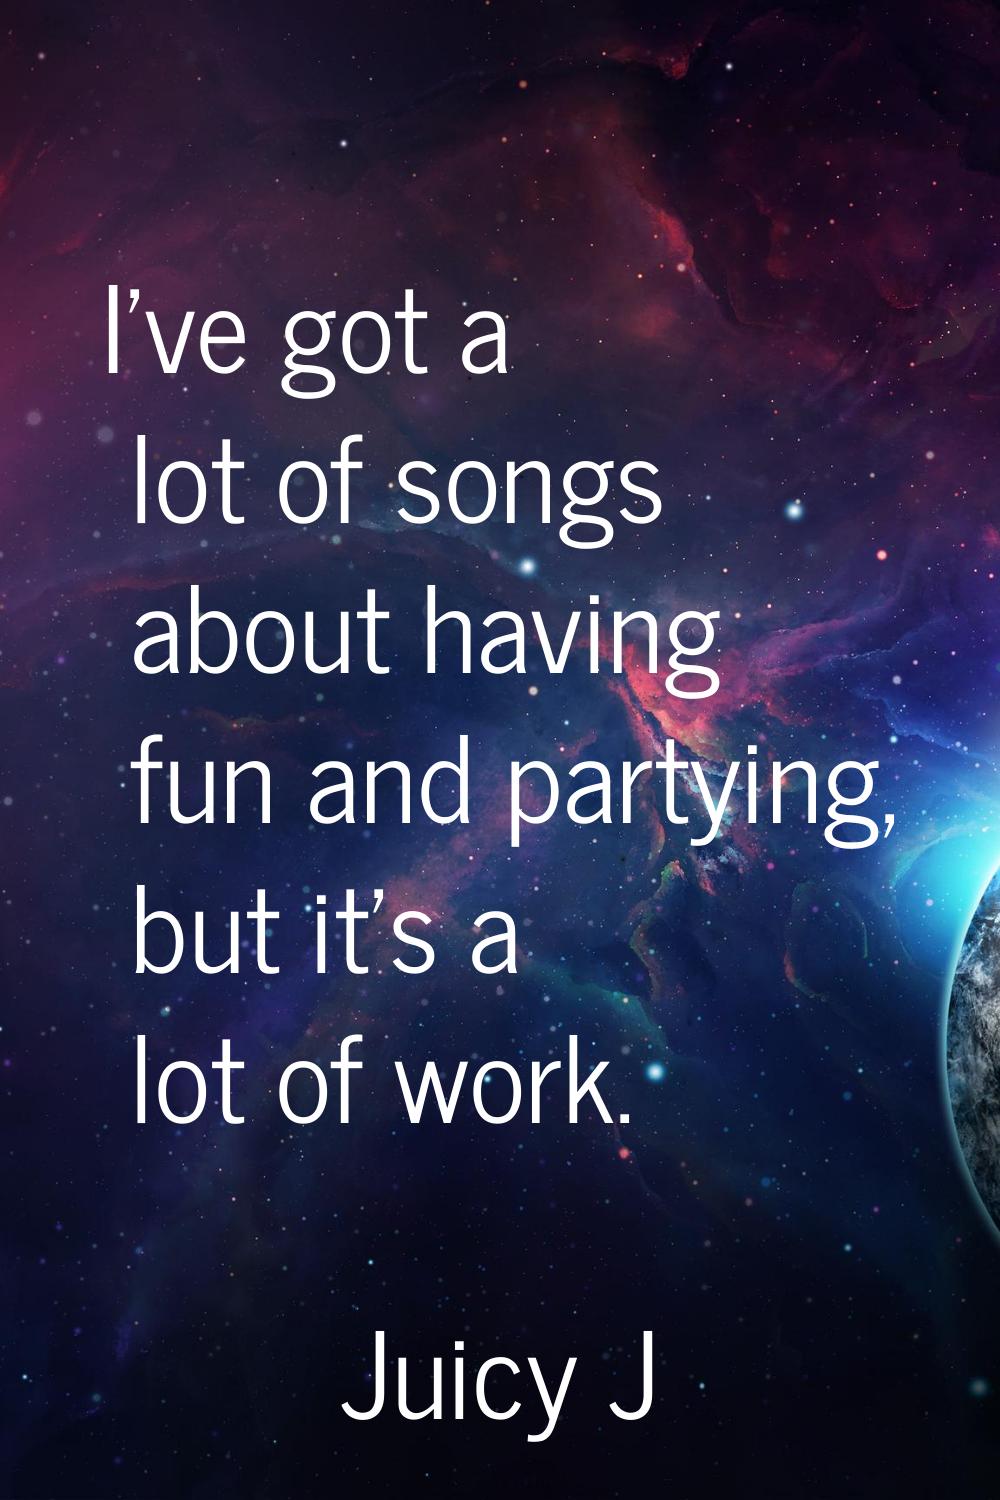 I've got a lot of songs about having fun and partying, but it's a lot of work.